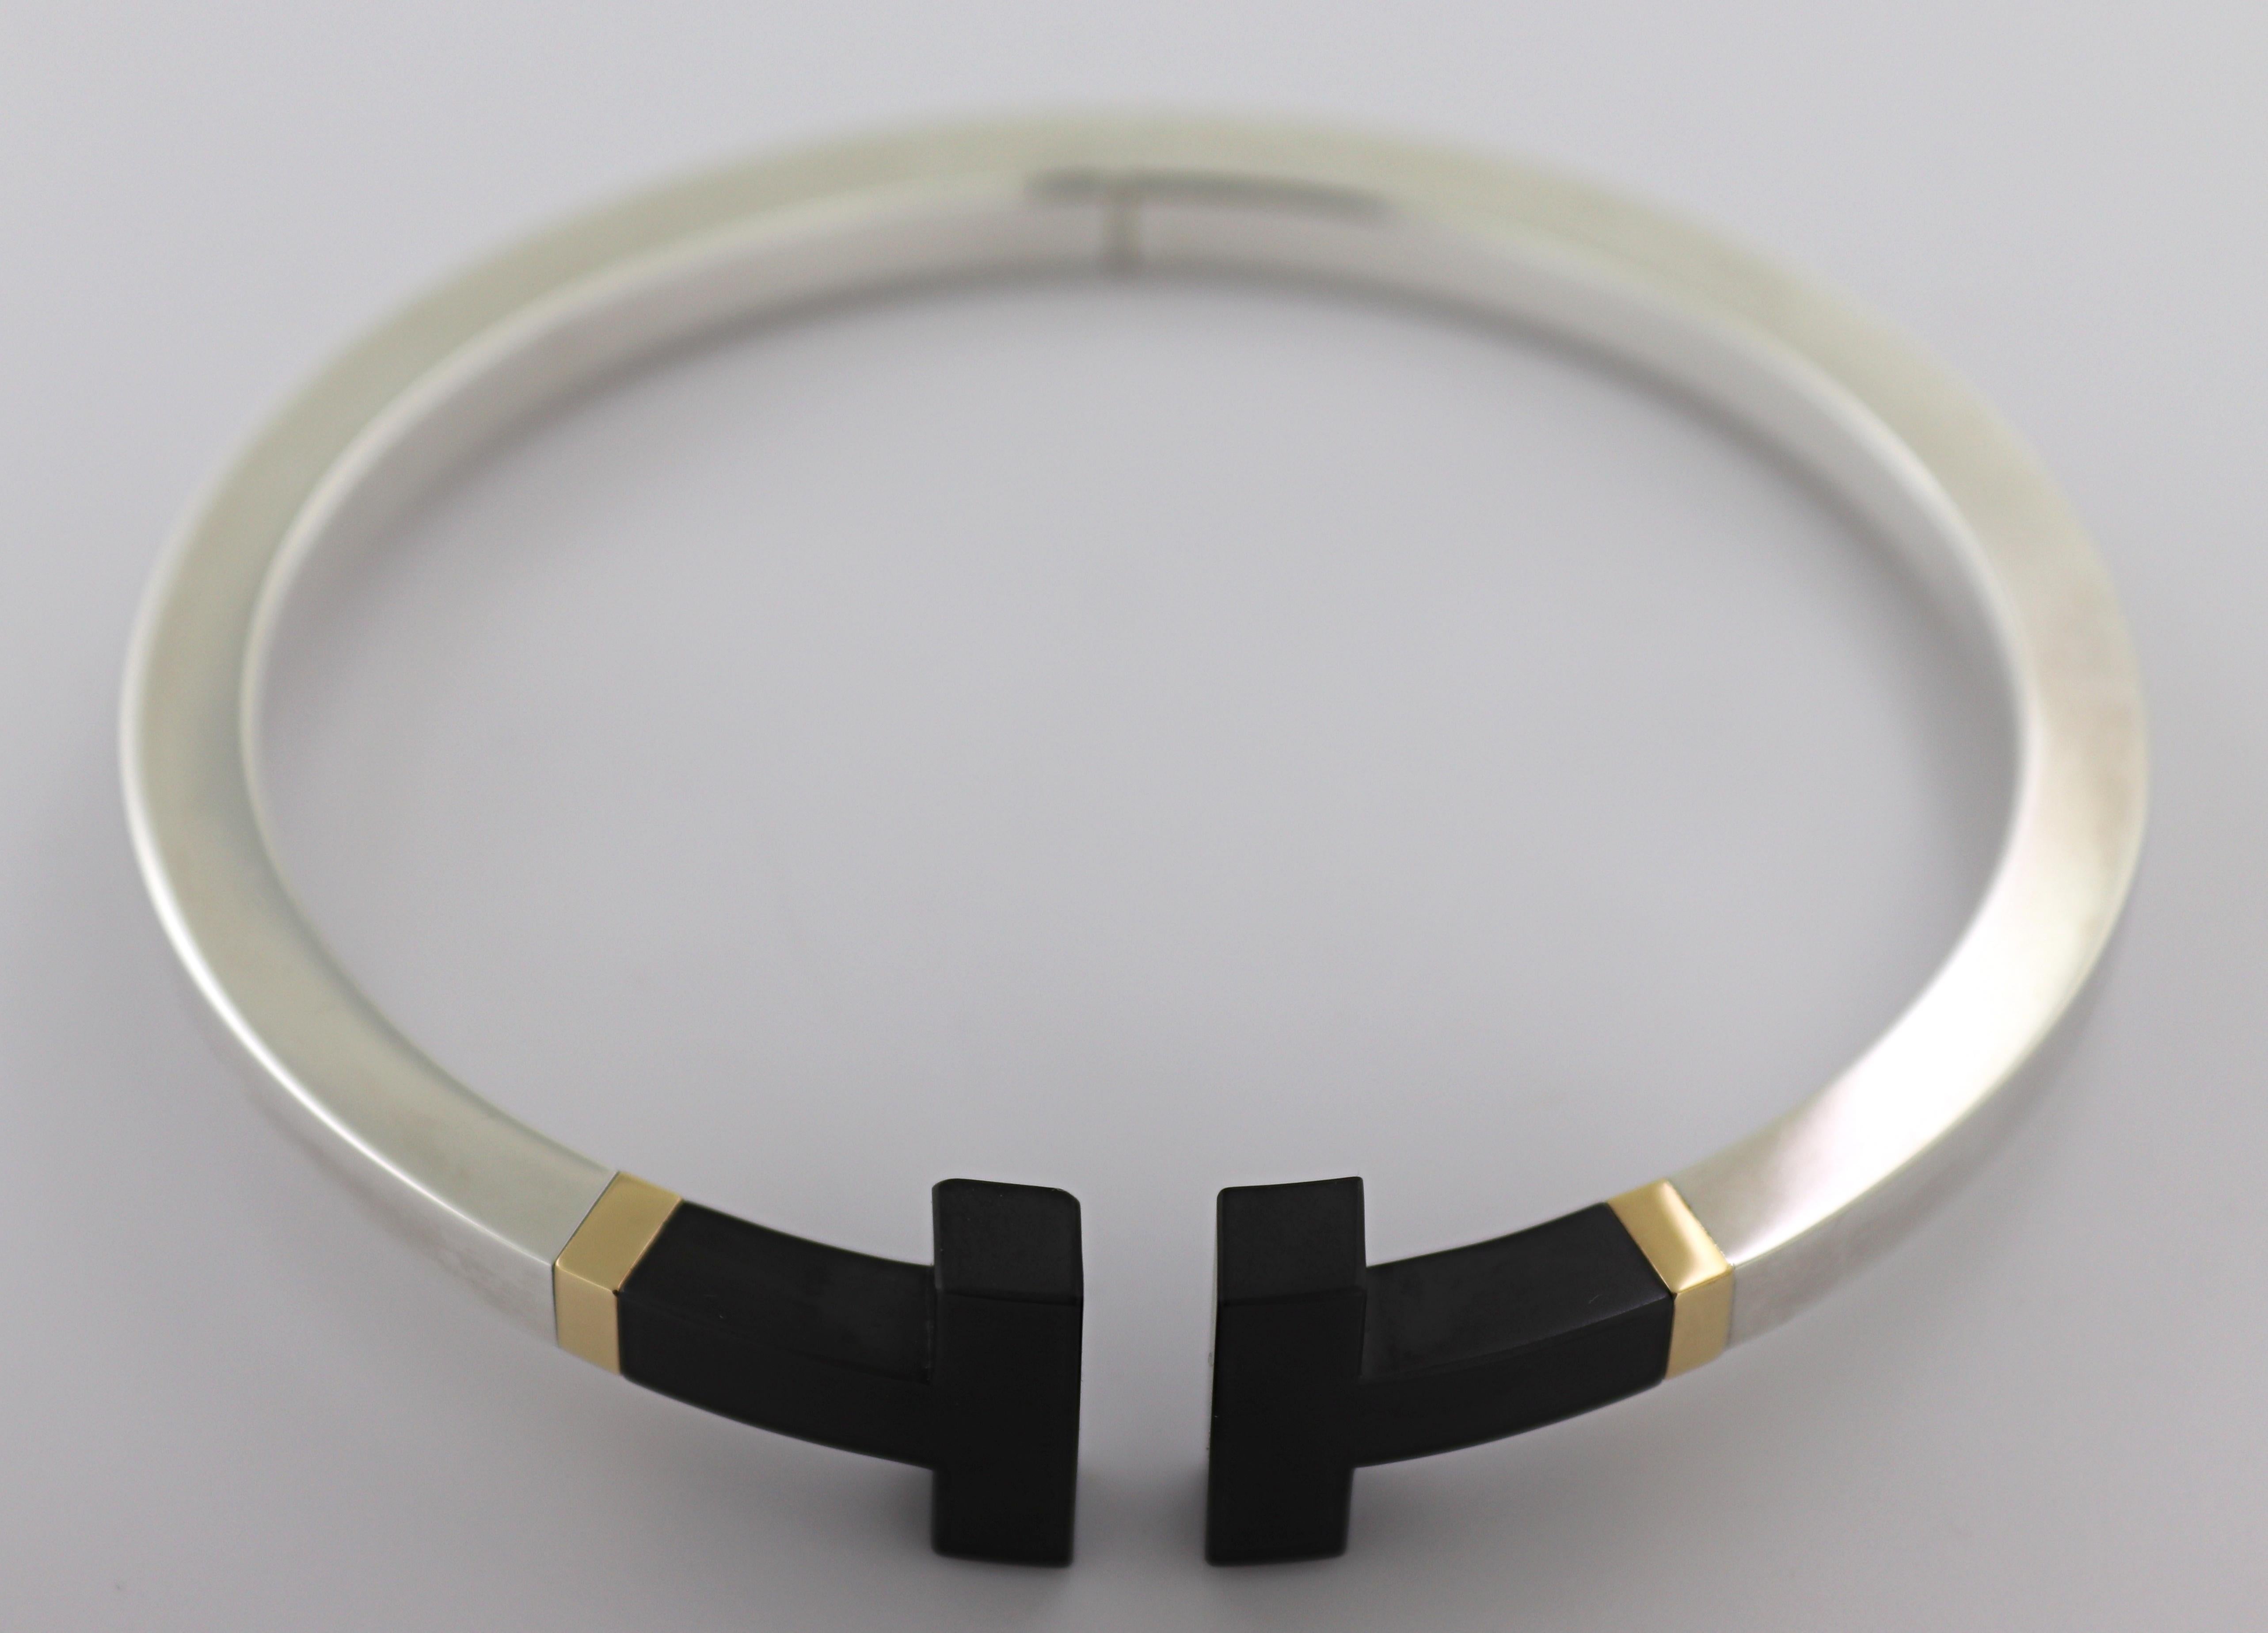 Tiffany & Co. Ceramic, Sterling Silver, 18k Yellow Gold “T” Bracelet For Sale 1